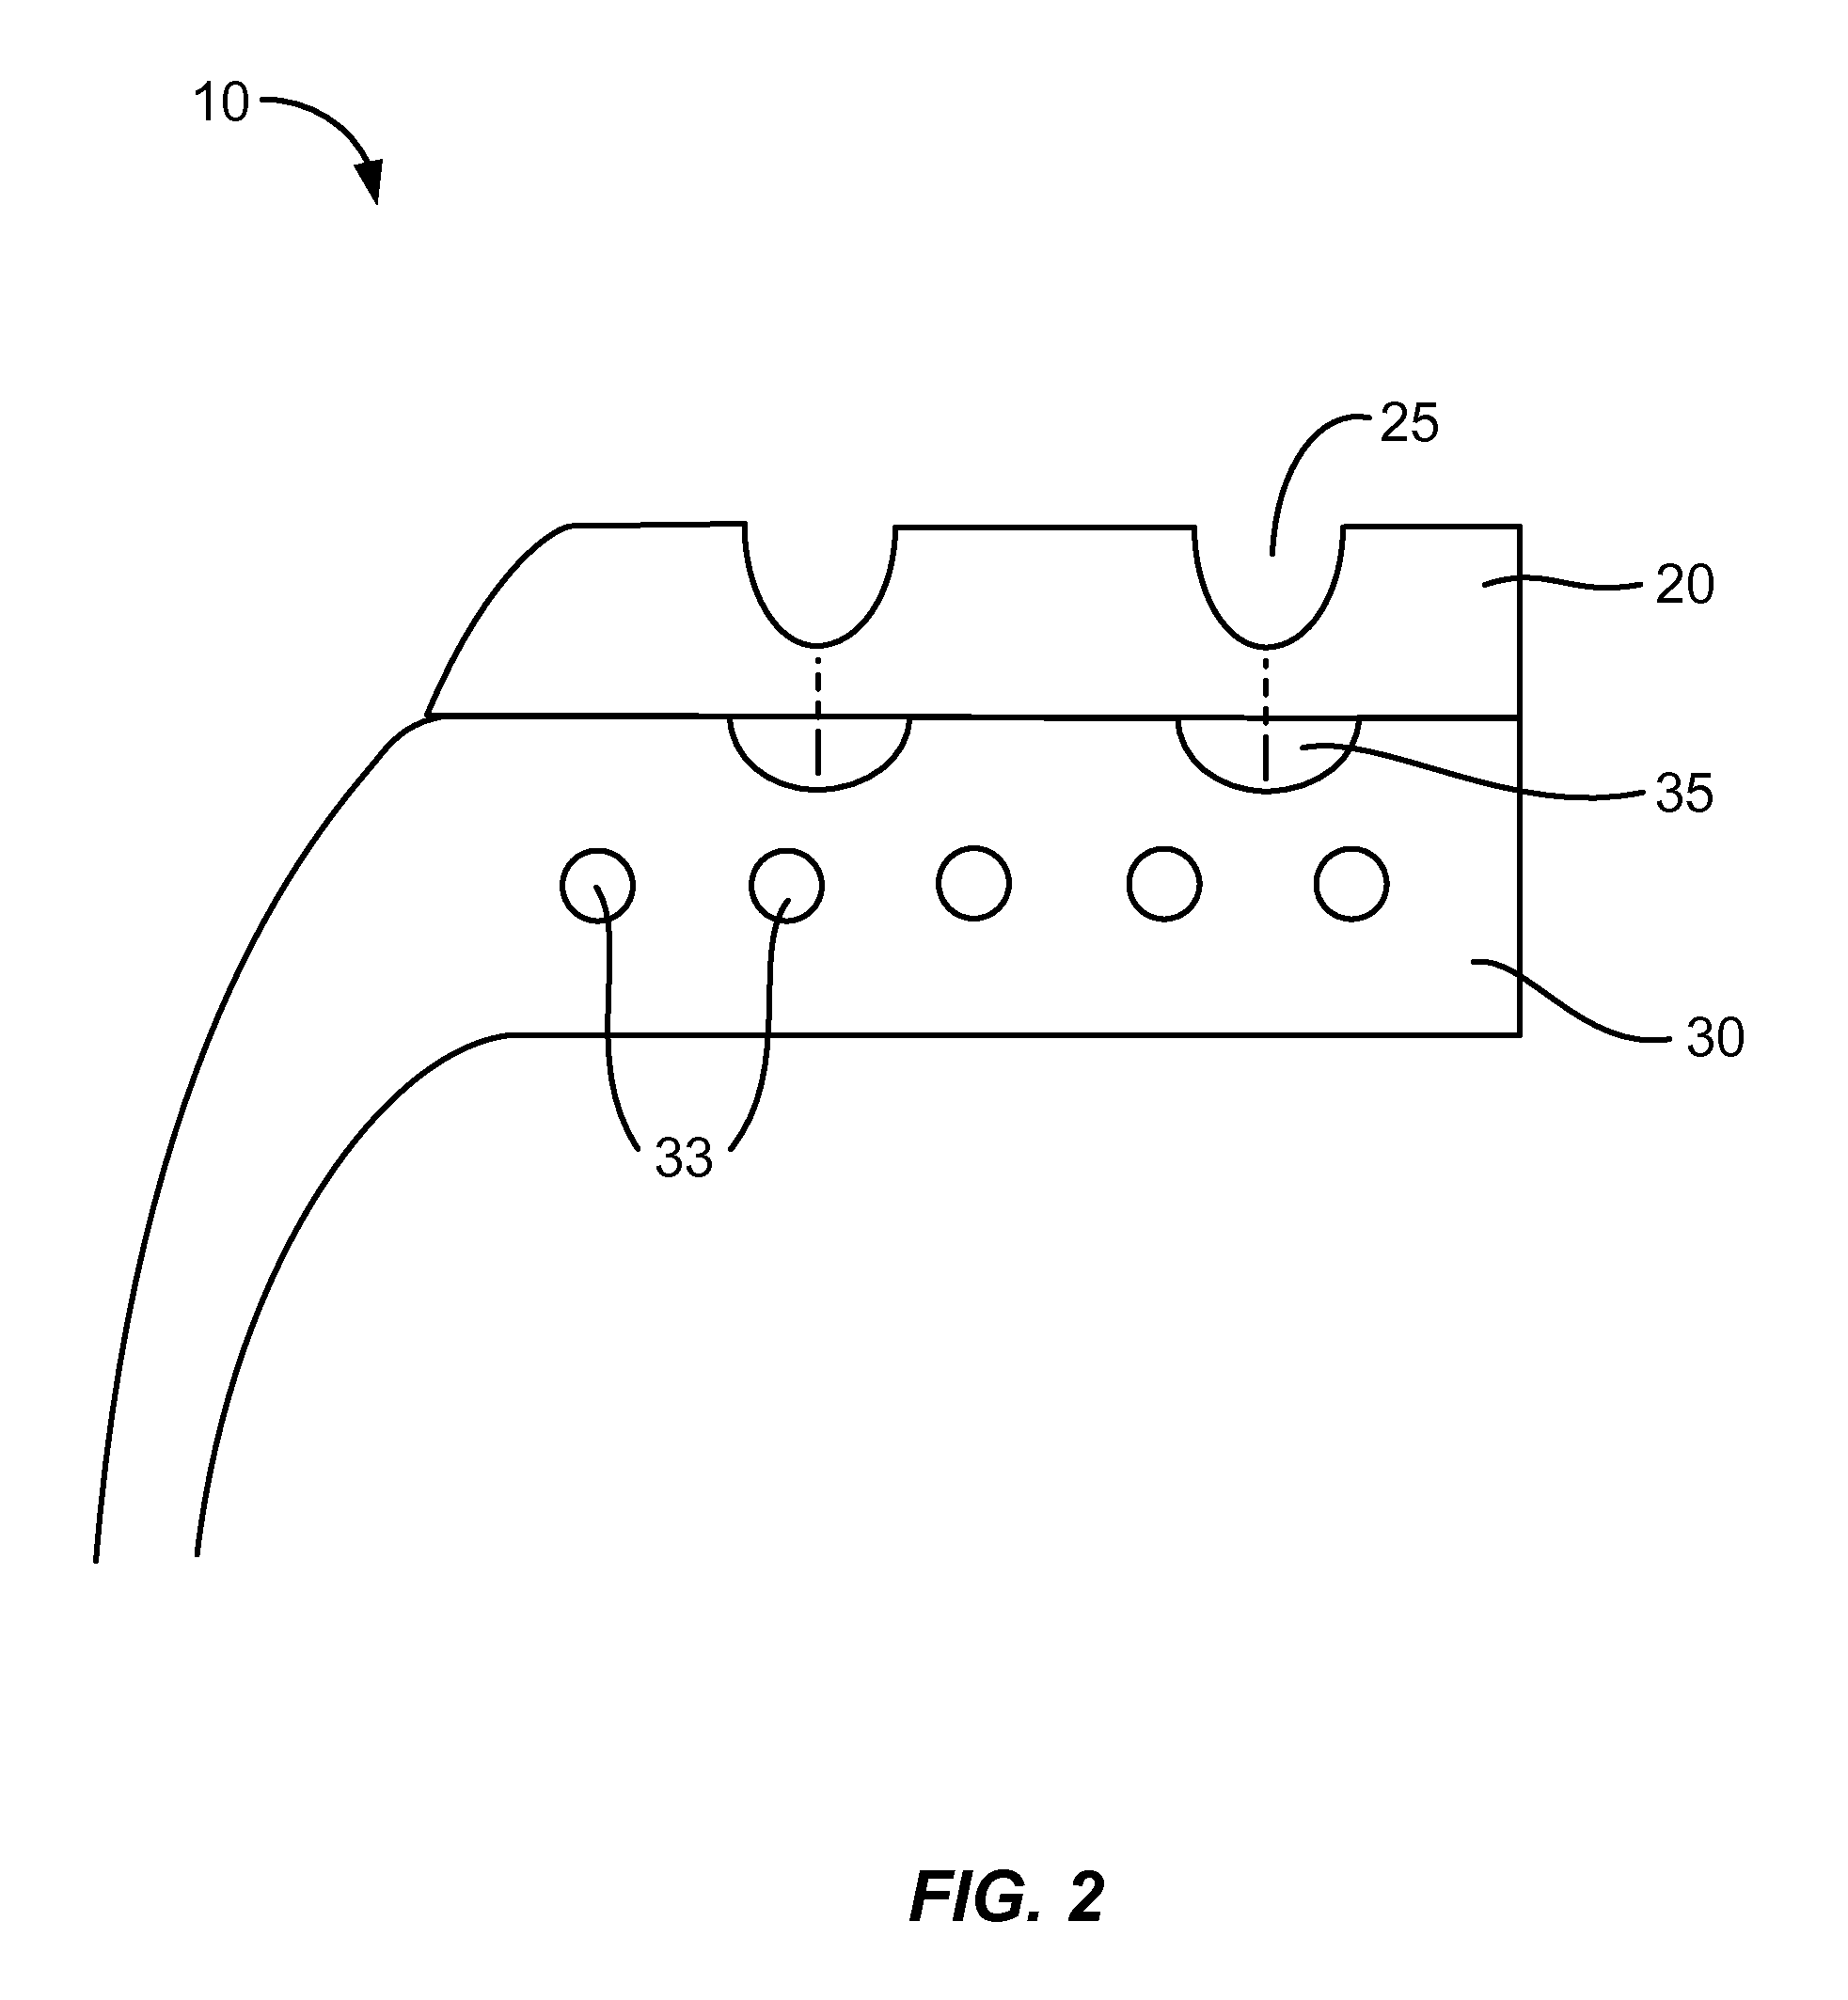 Systems and Methods for Forming Retread Tires Using Flat Backed Tread